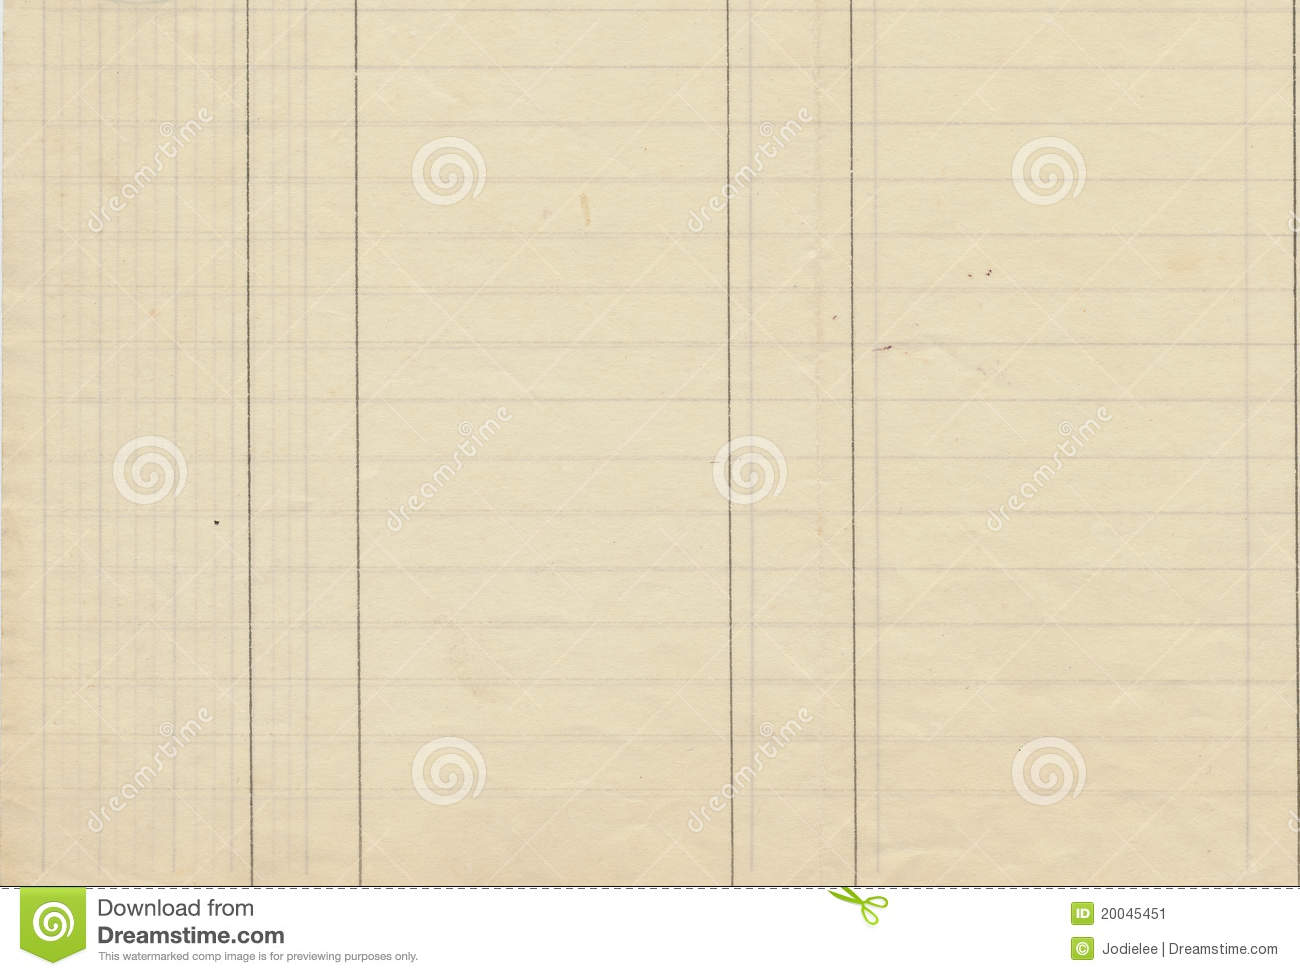 Antique Lined Ledger Paper With Lines And Grid In Cream Color 